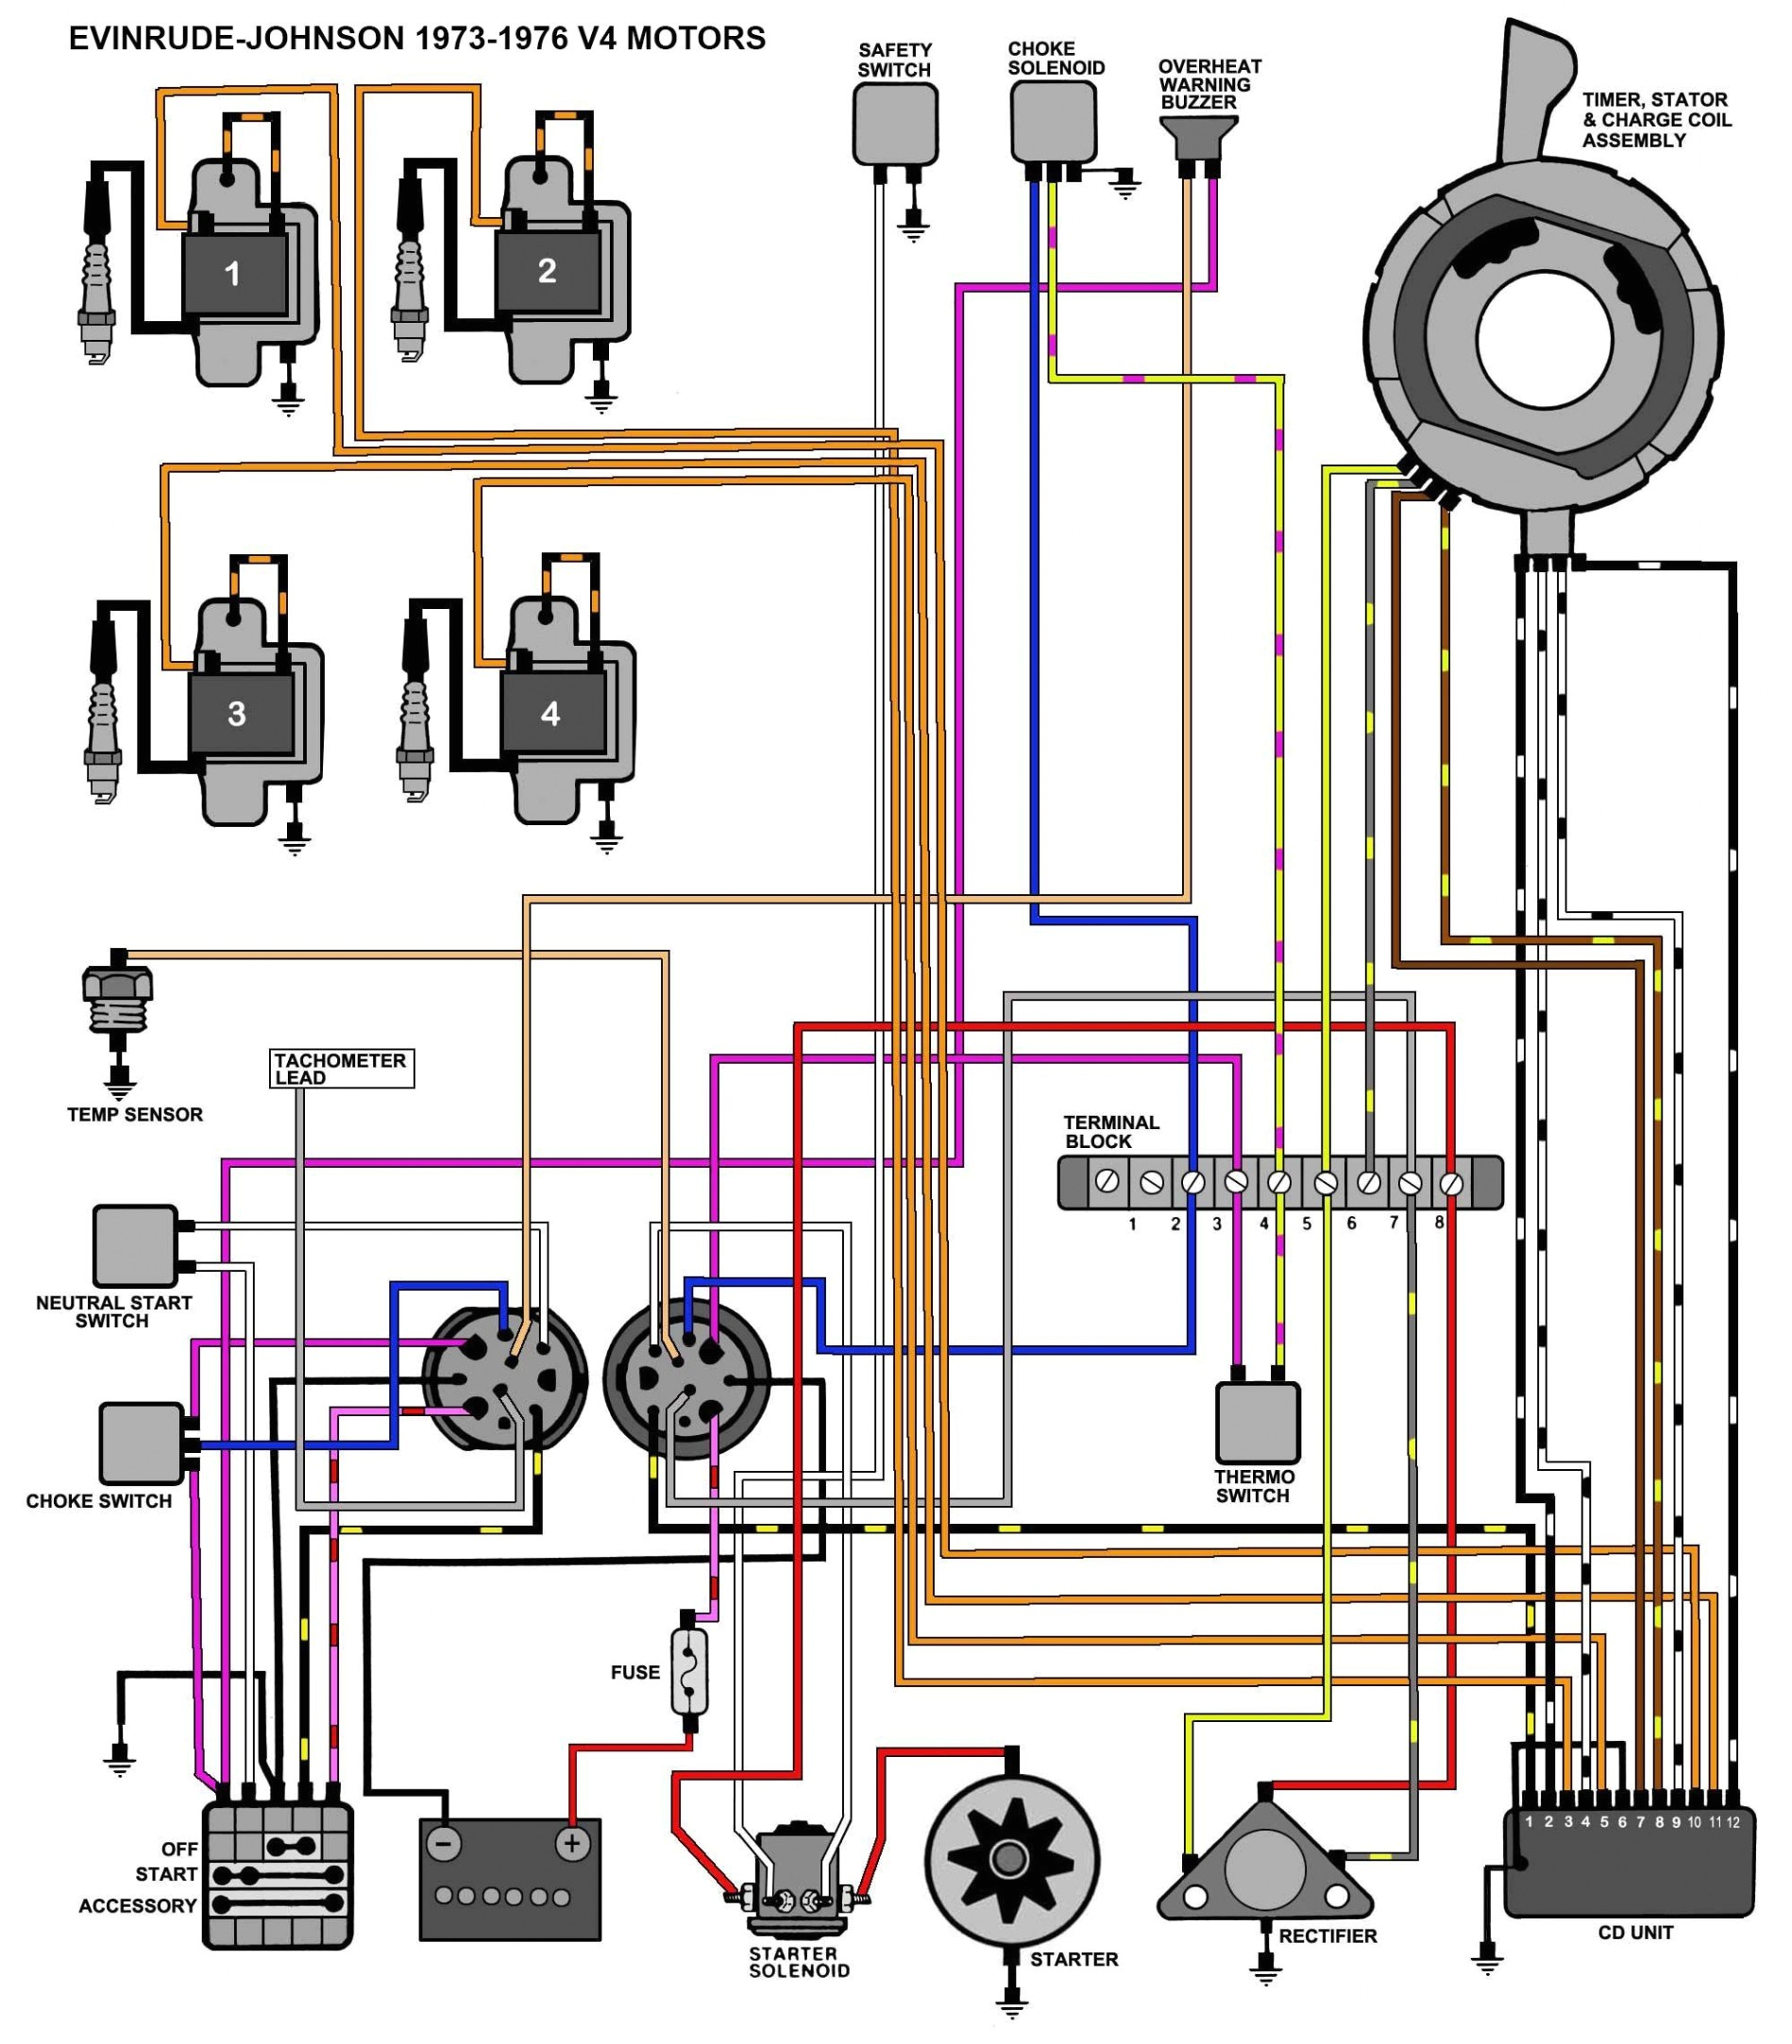 yamaha outboard wiring harness diagram wiring diagram furthermore 115 hp johnson outboard wiring diagram of yamaha outboard wiring harness diagram jpg